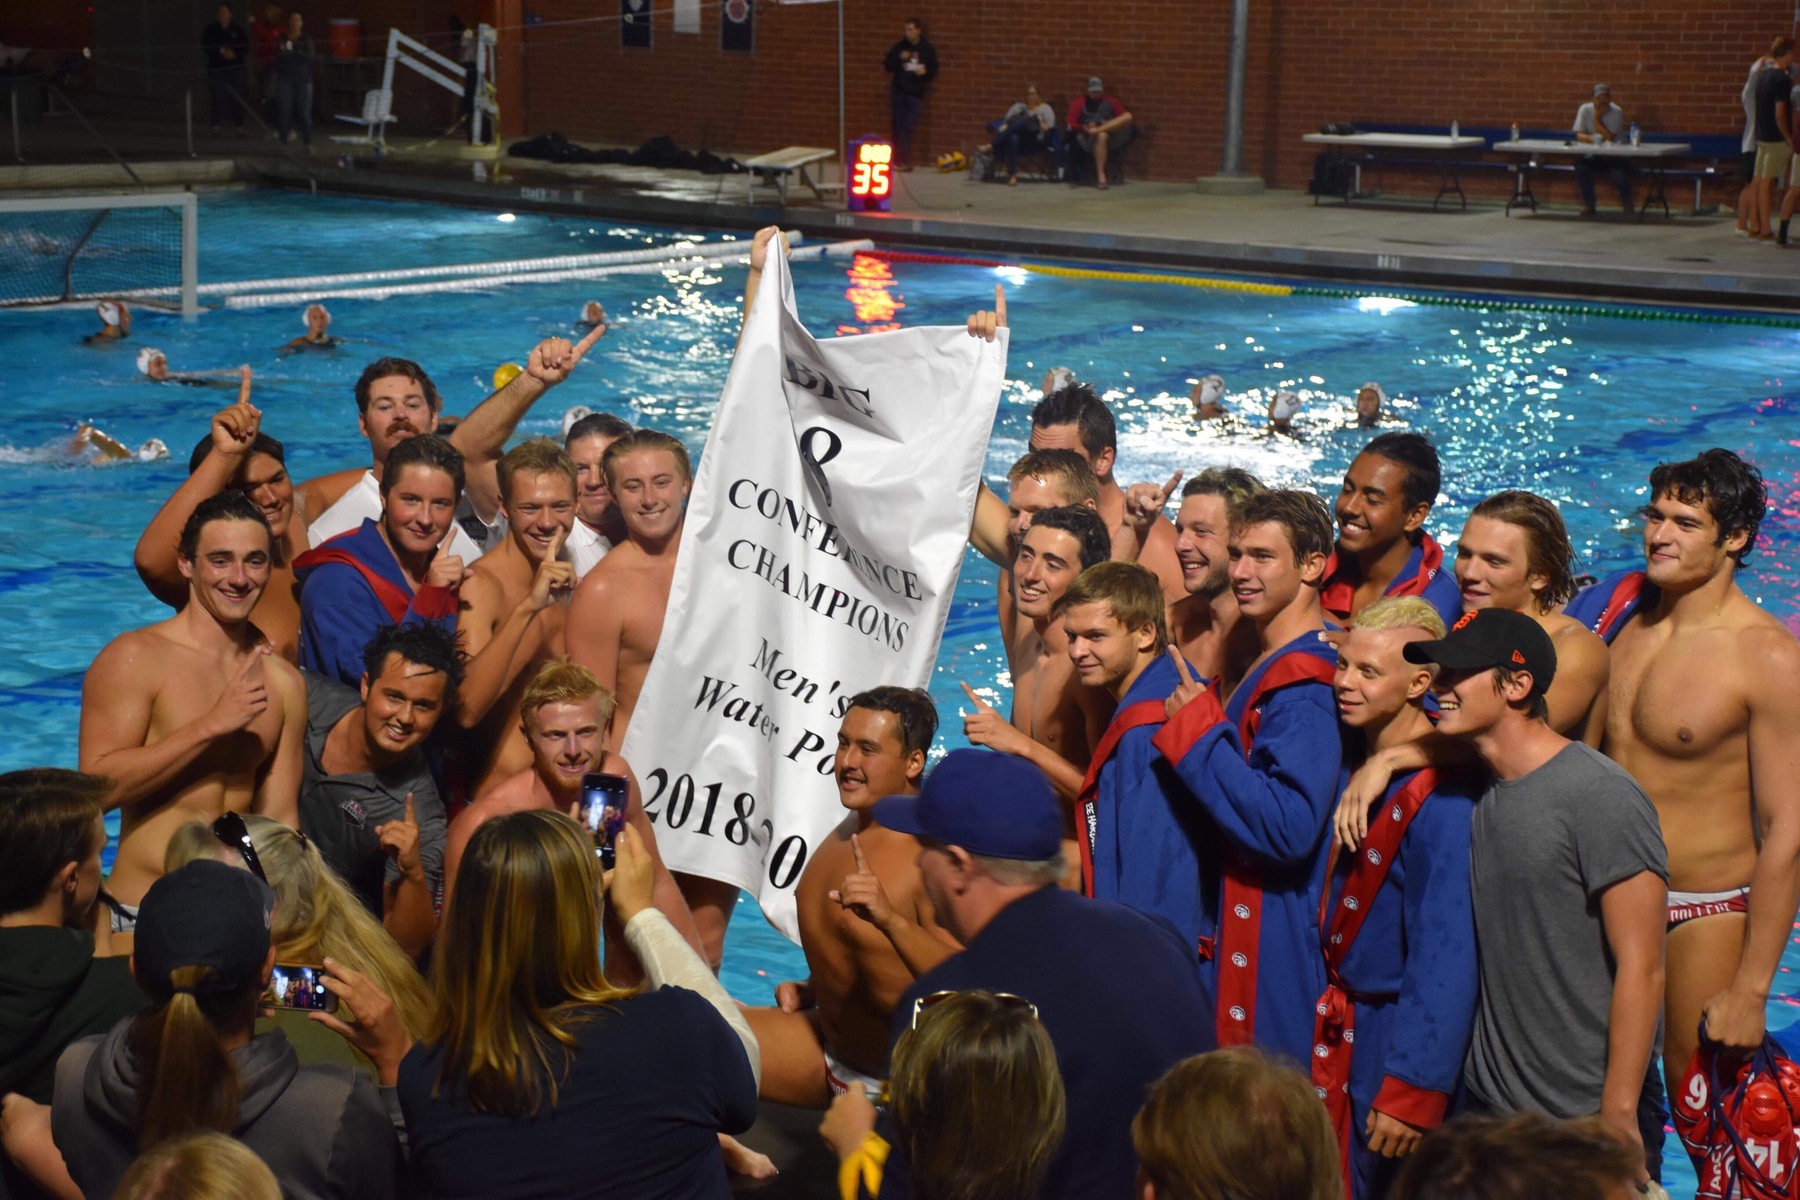 Men's Water Polo - Big 8 Champions for the First Time in ARC History